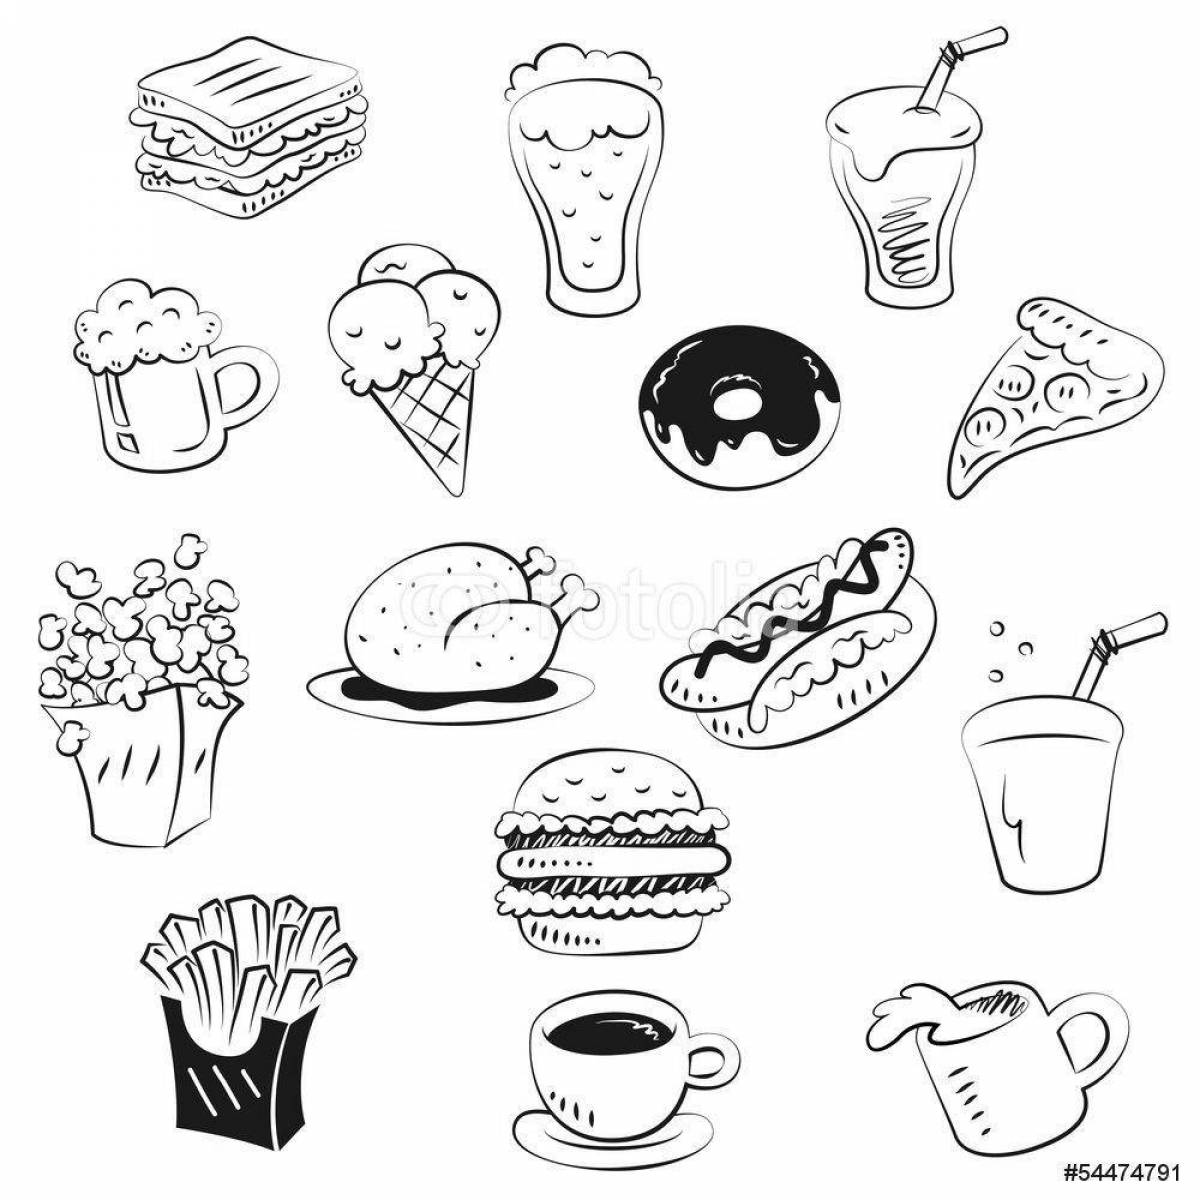 Coloring page of happy food stickers